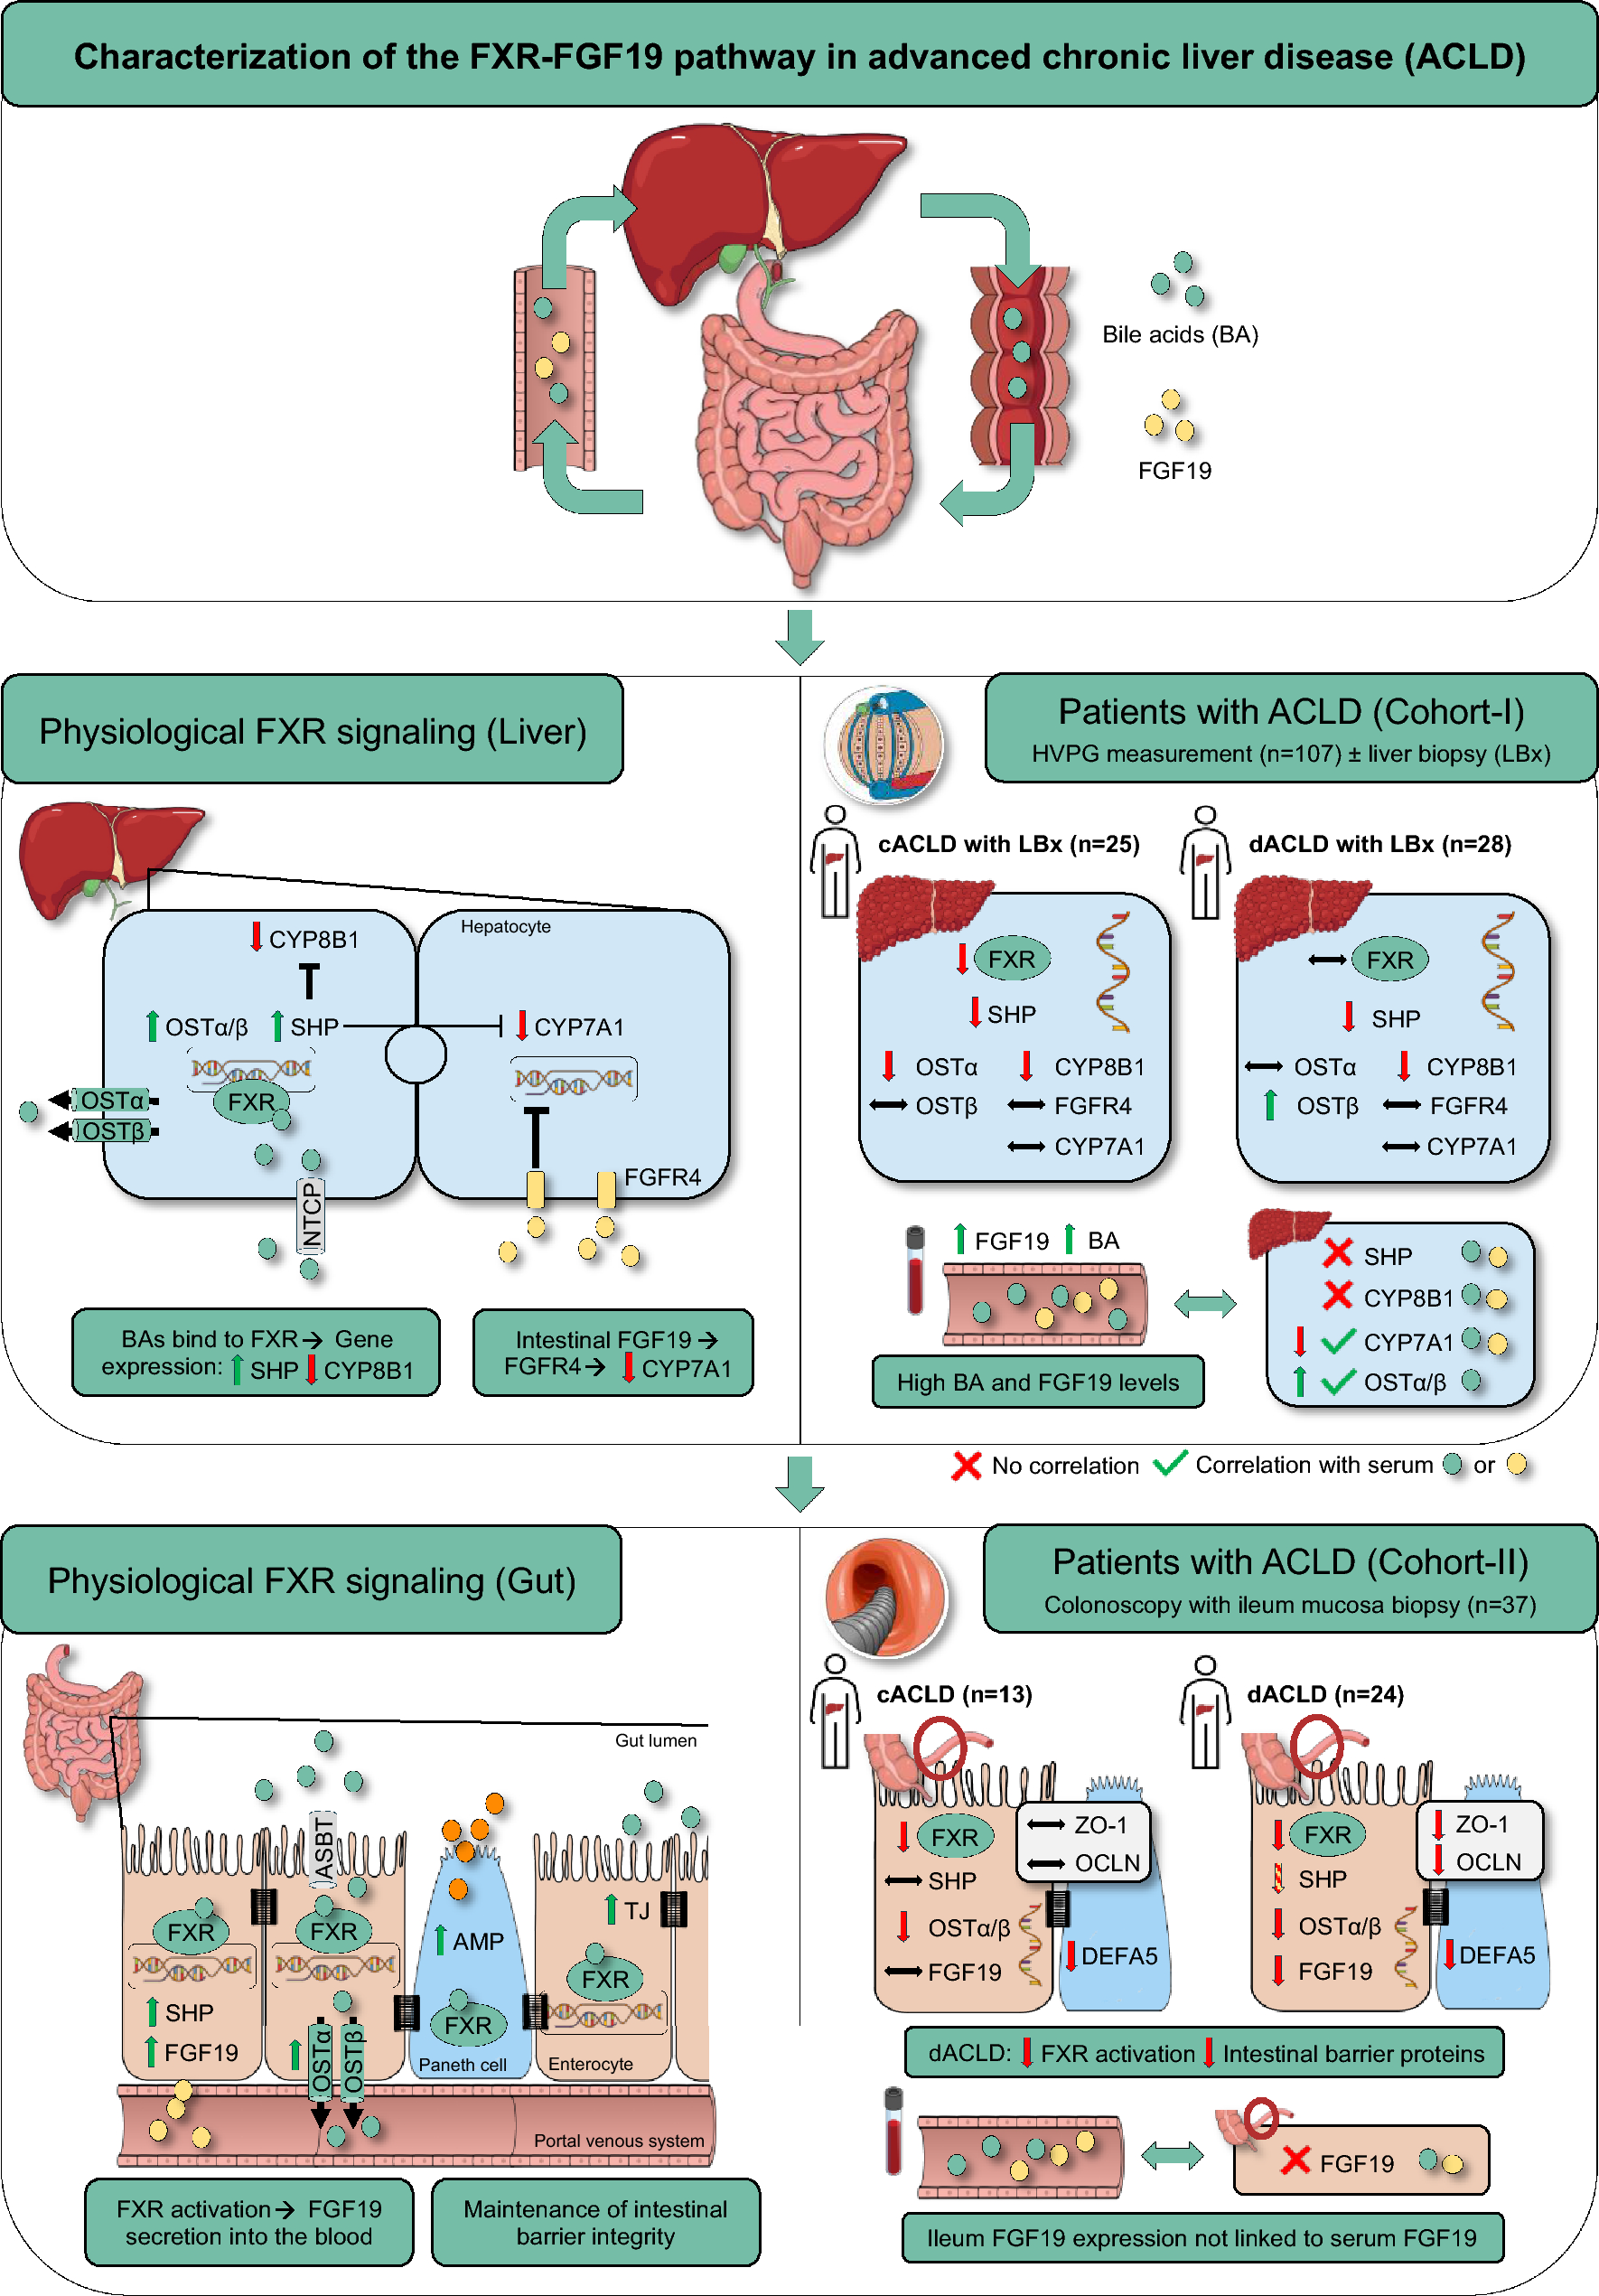 FXR-FGF19 signaling in the gut–liver axis is dysregulated in patients with cirrhosis and correlates with impaired intestinal defence